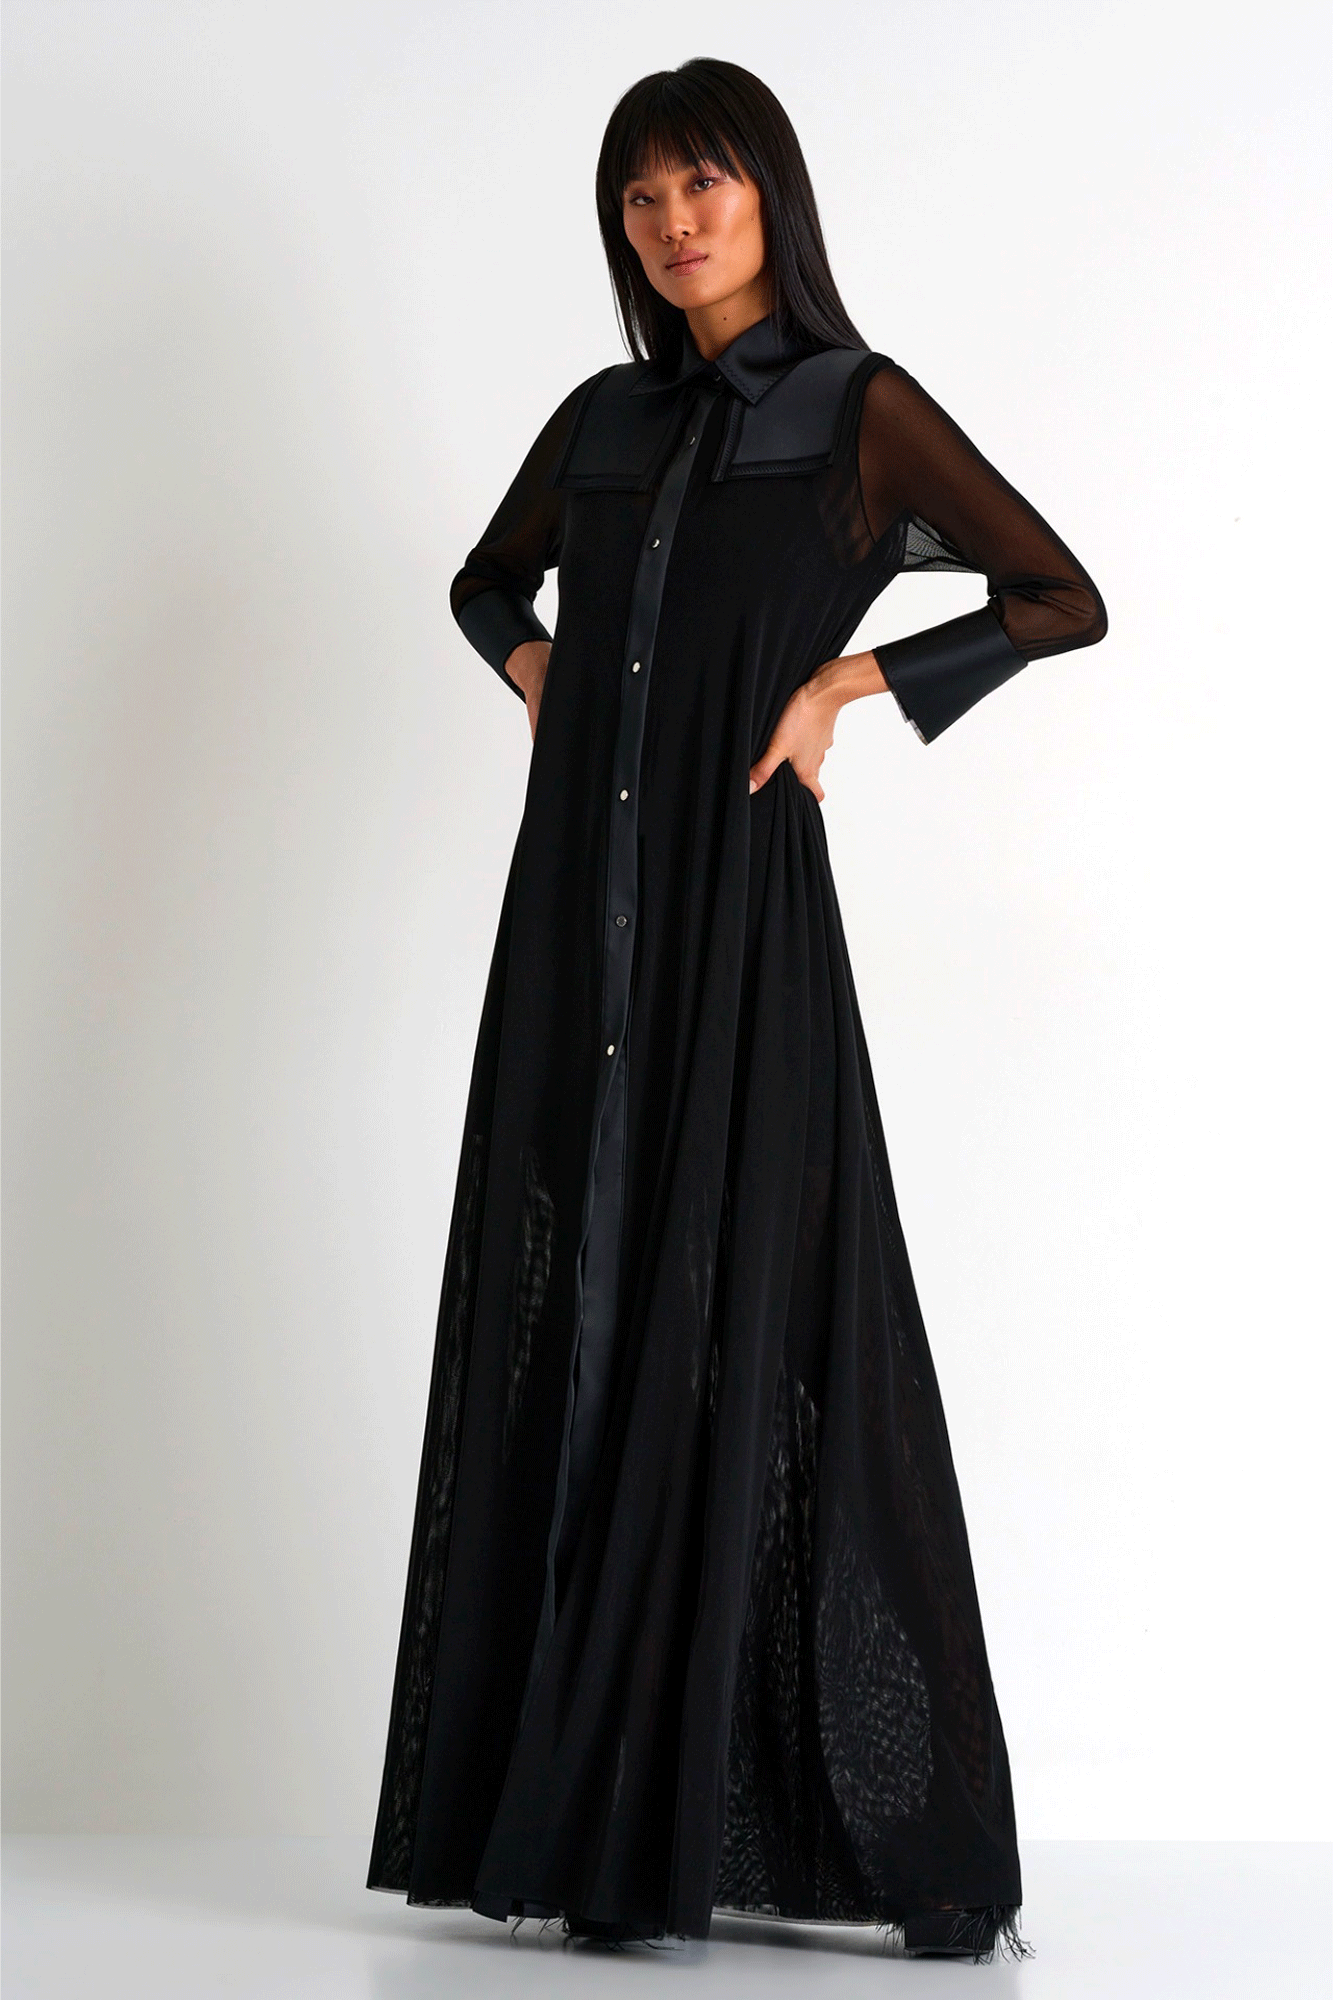 Modern elegance comes alive in the Helena Maxi Mesh Dress from Shan. Its classic maxi shirt dress silhouette is designed with long mesh sleeves and satin French cuffs for an elevated, contemporary look. The golden front button closure and flare fit make for a graceful movement with every step. An essential piece for any wardrobe.